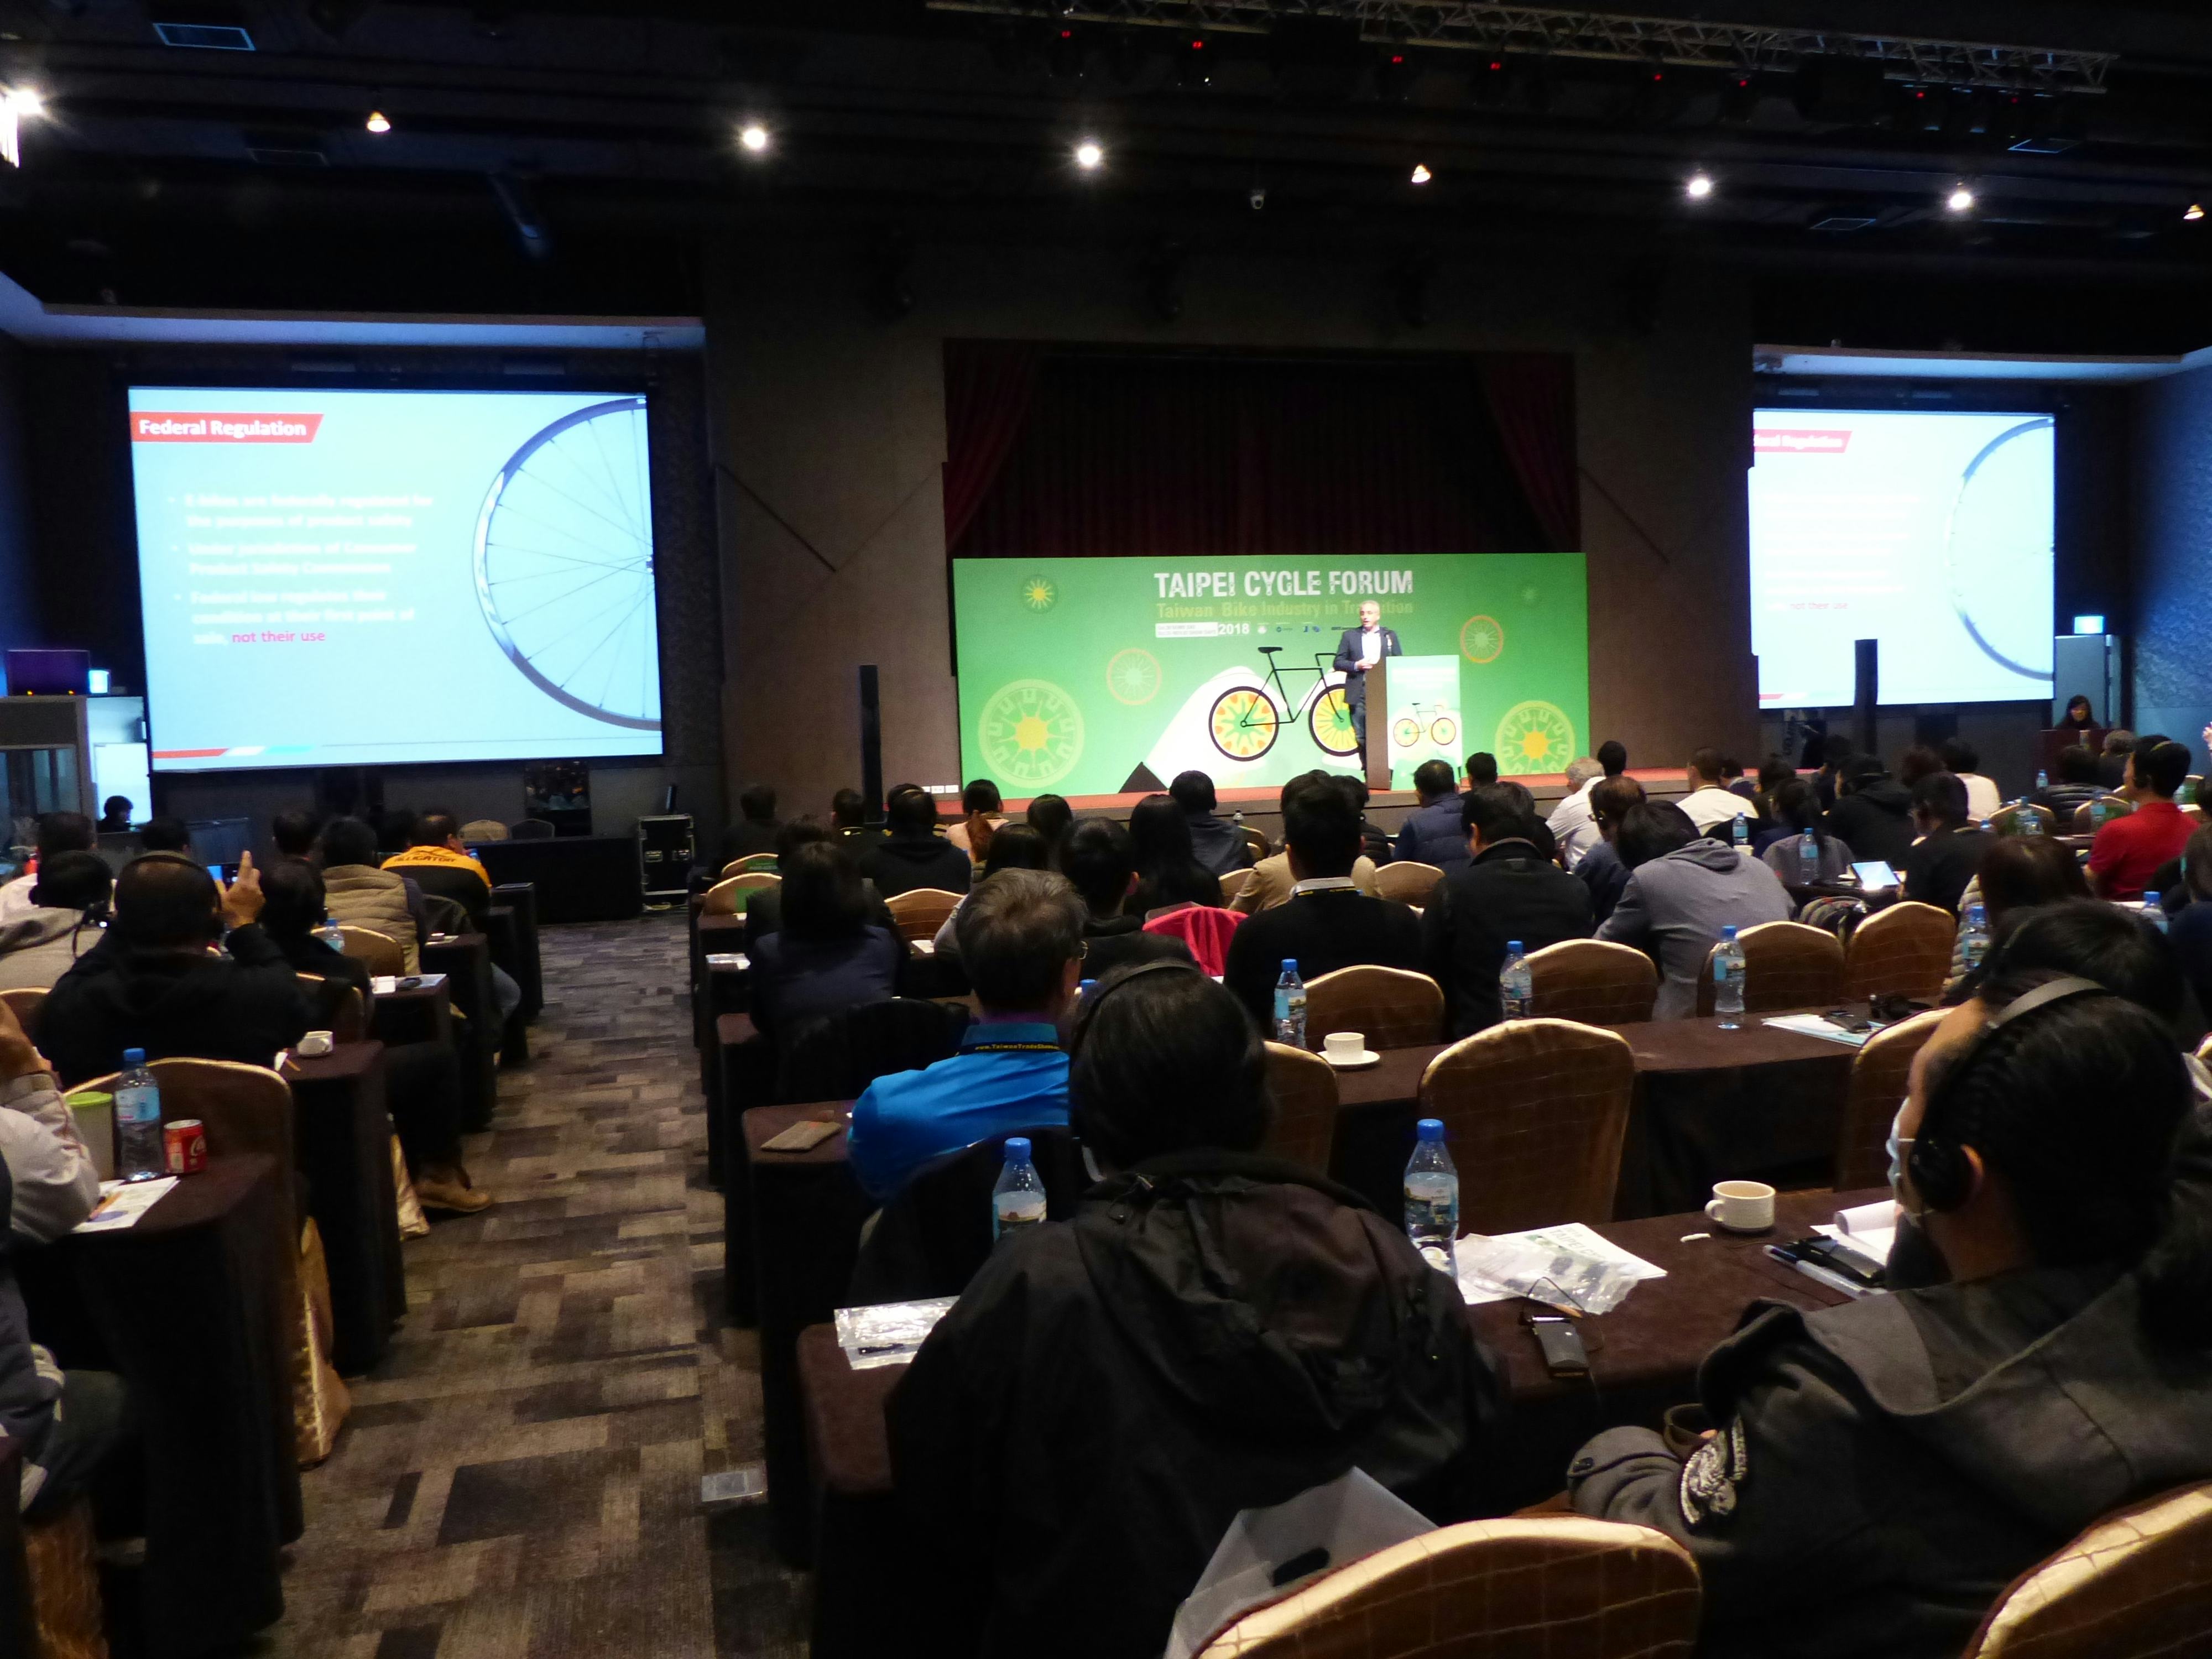 ‘Move cycling image from ‘green’ to ‘smart’ by having e-bikes to provide for health data’ was one conclusion of Taipei Cycle Forum’s panel debate. – Photo Taipei Cycle Forum